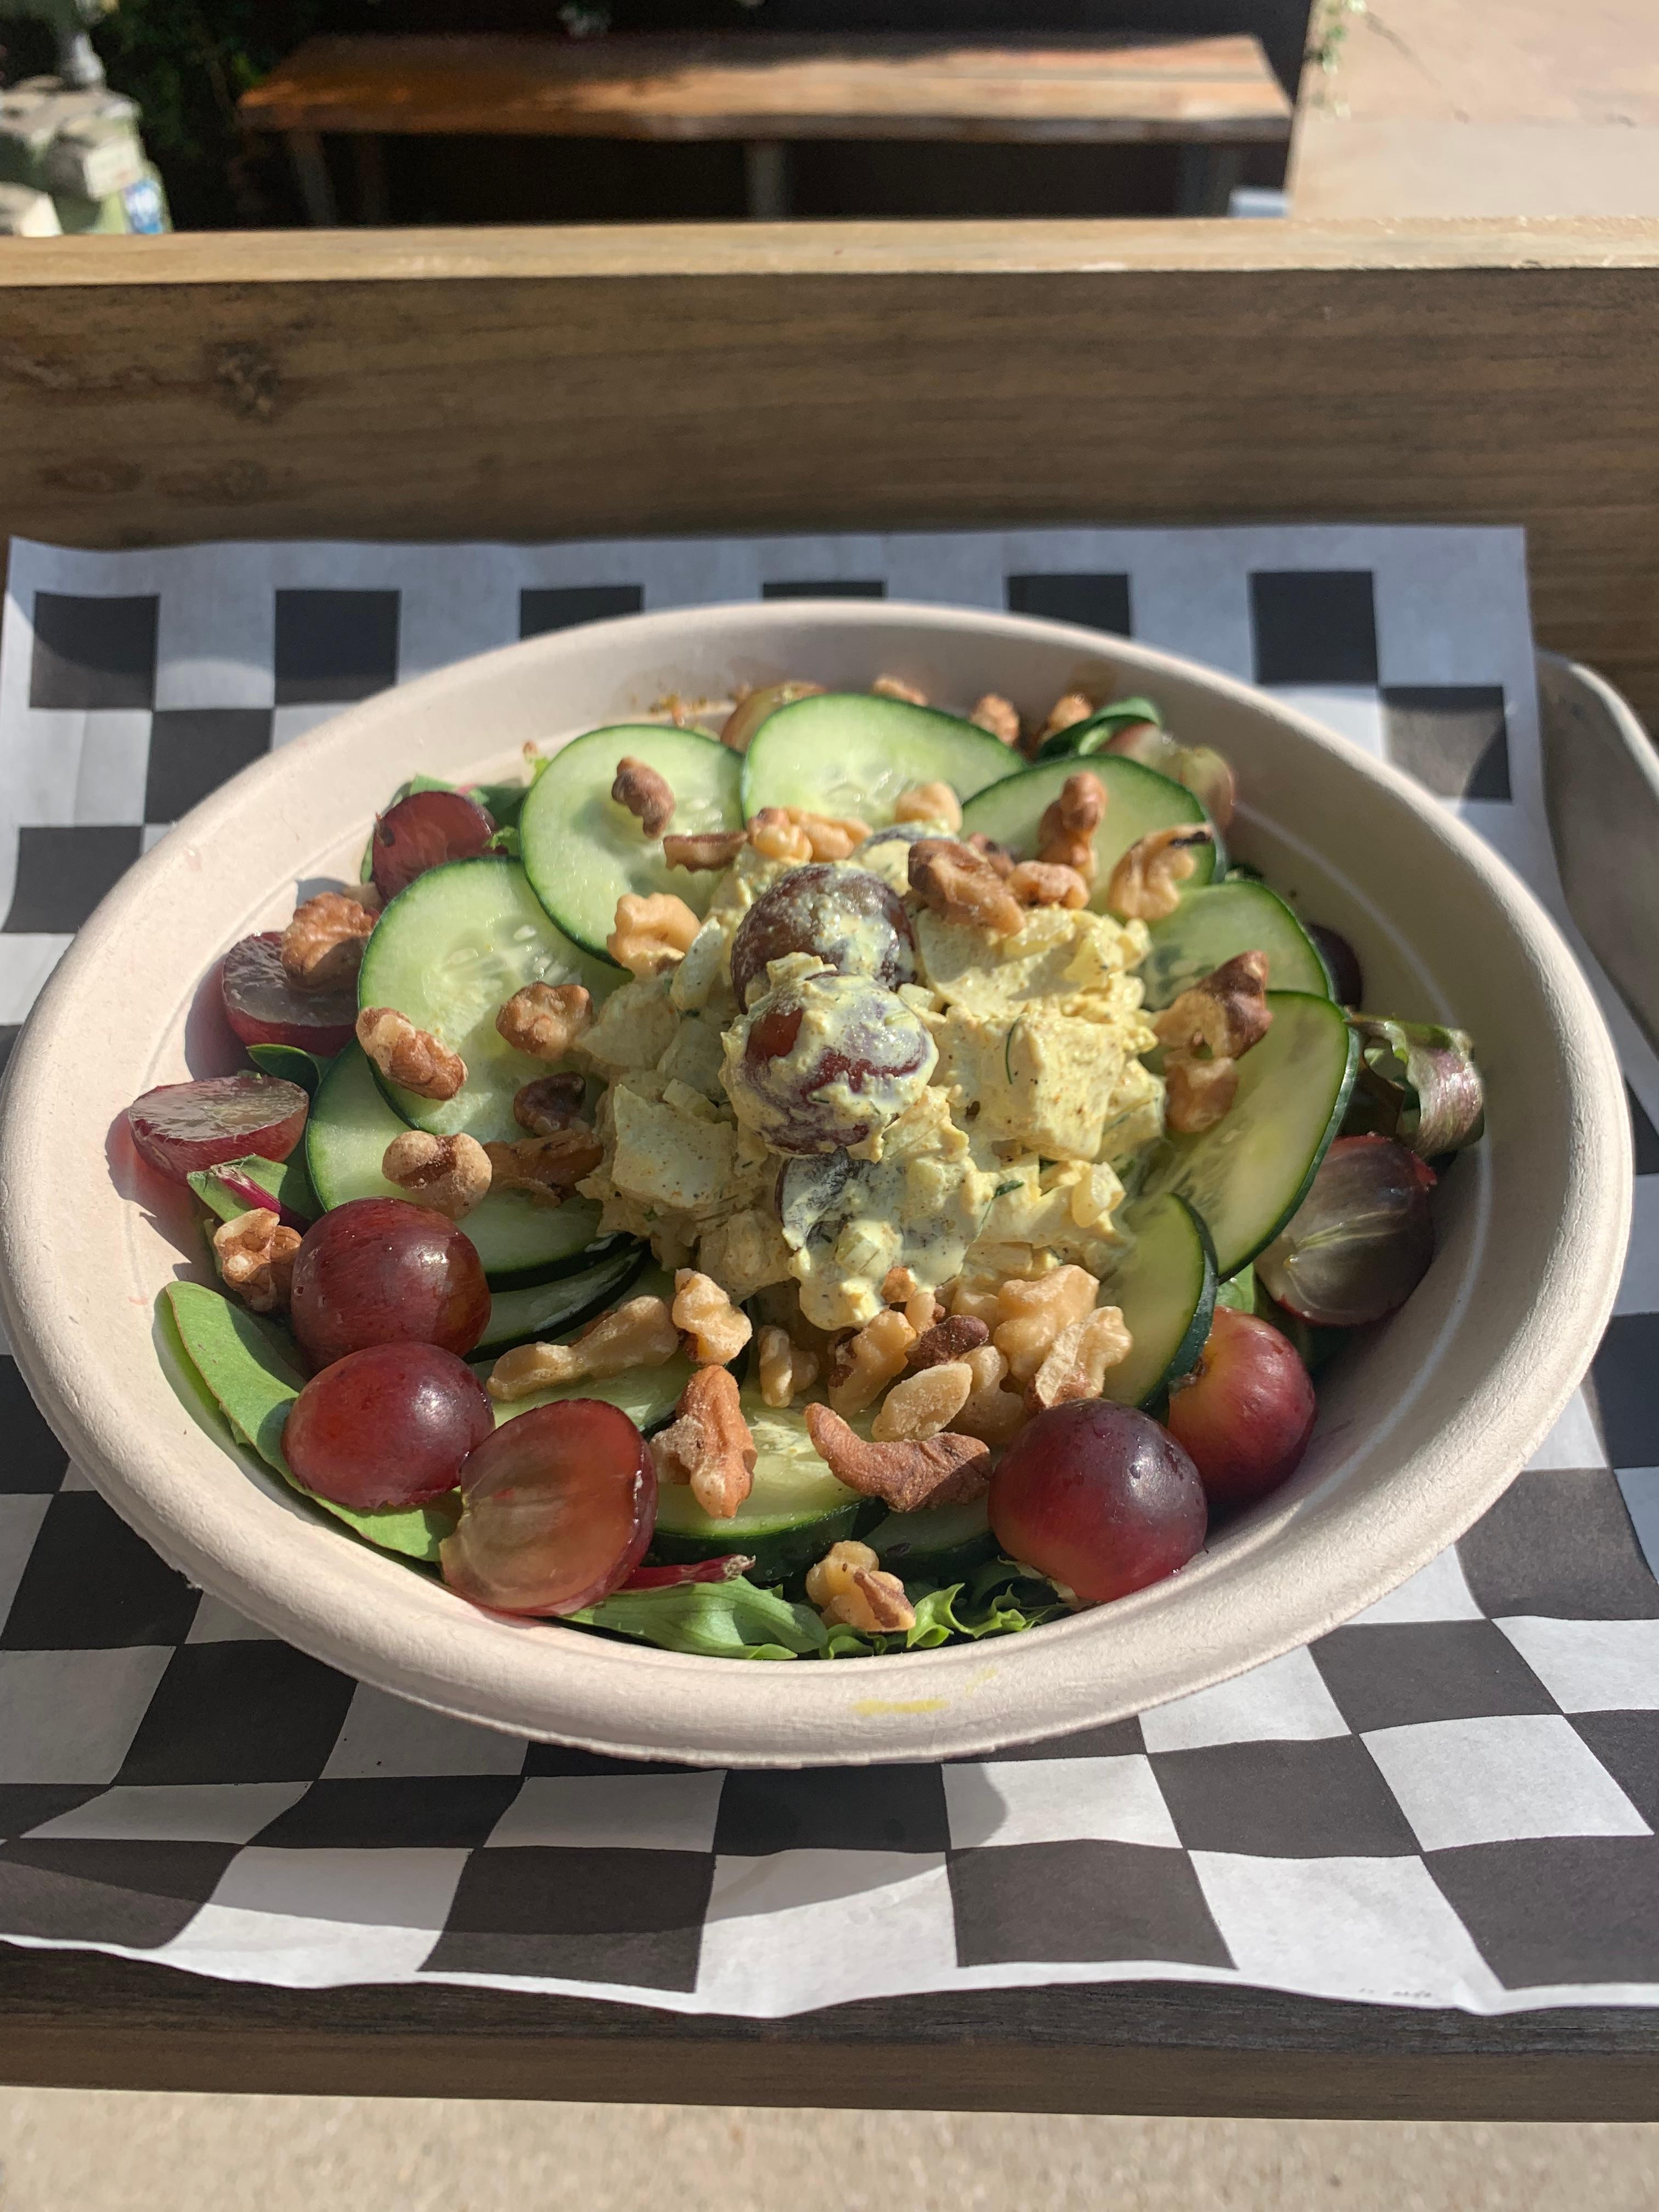 Salad Topped With Curried Chicken Salad